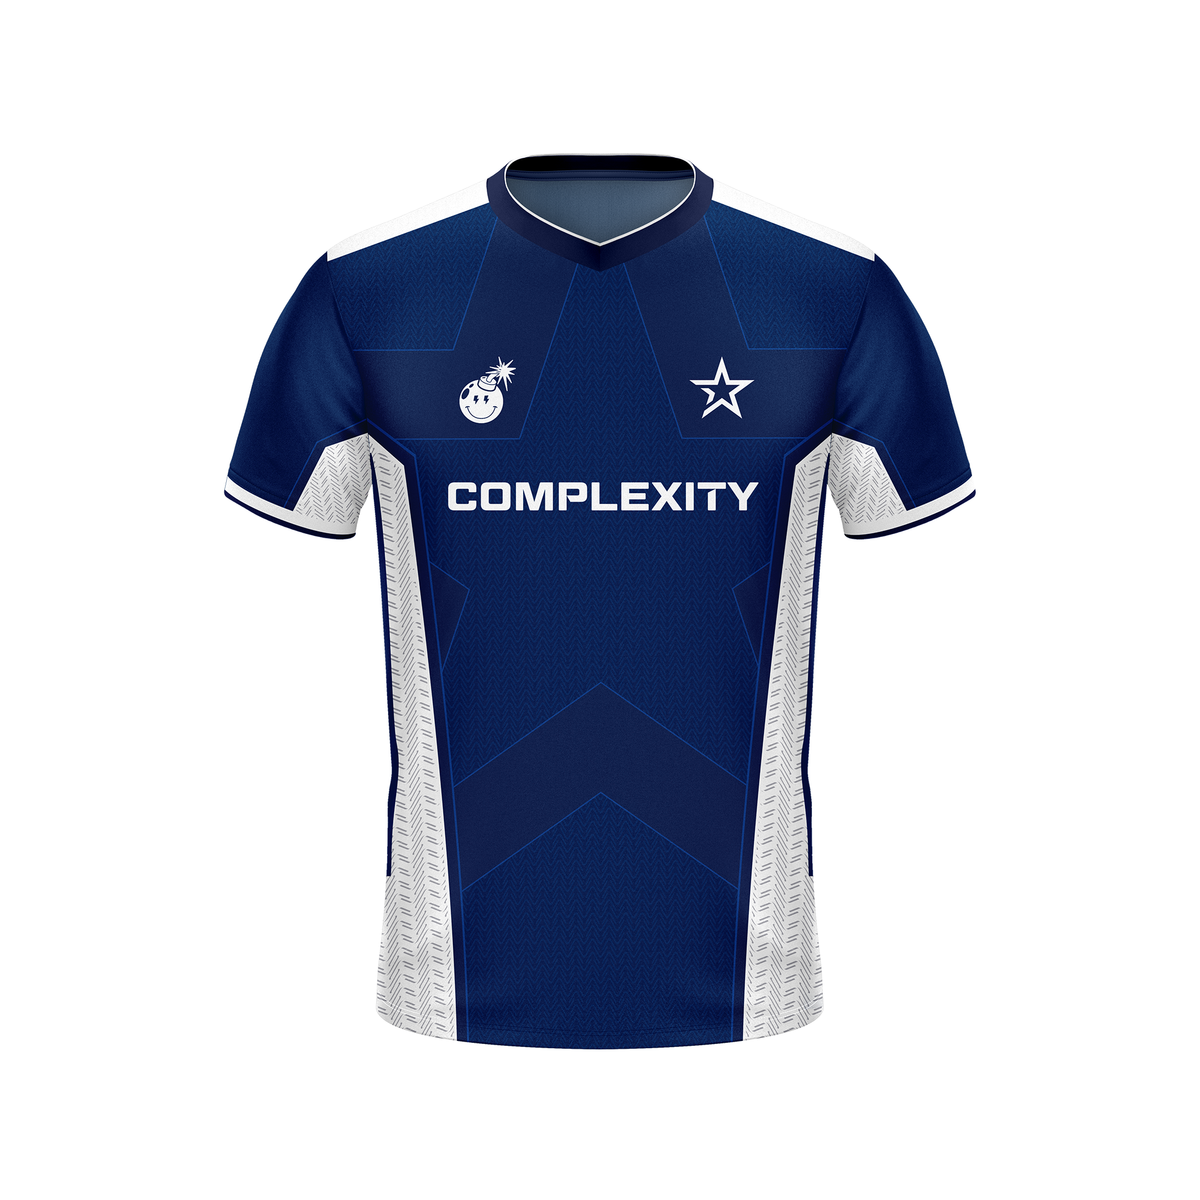 Complexity: Cloakzy Jersey